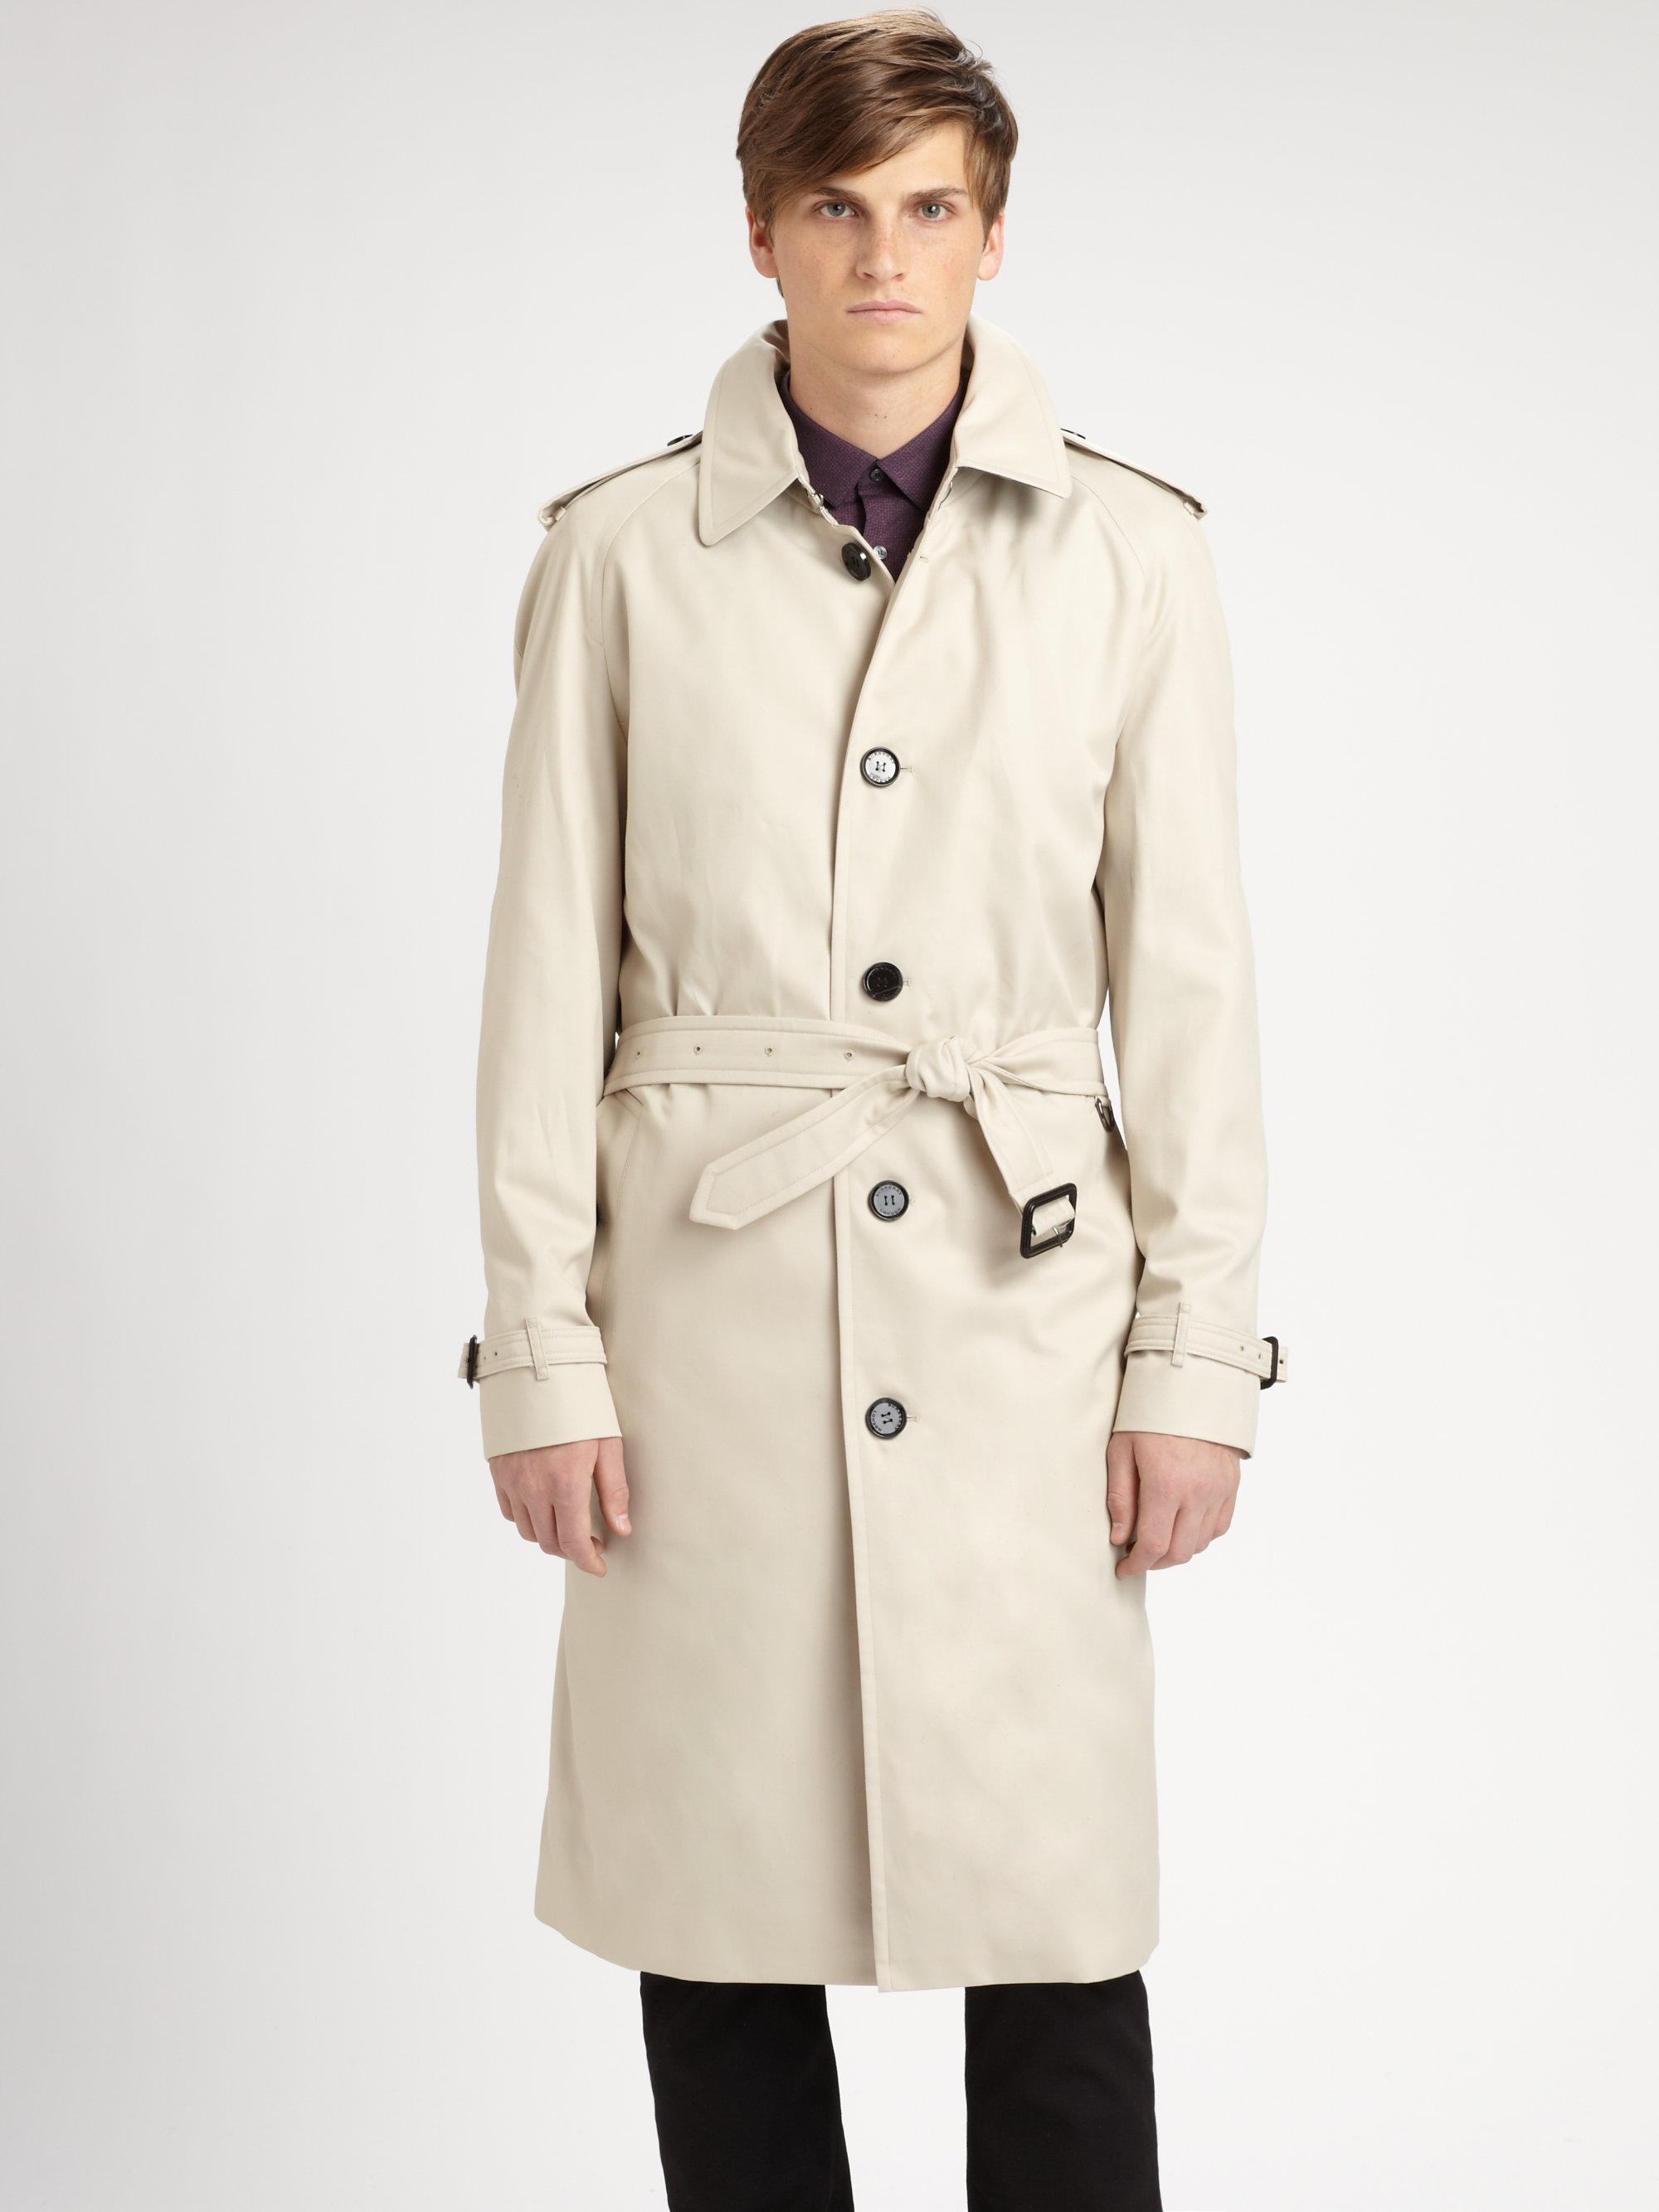 Lyst - Burberry Trench 19 Long Raincoat in Natural for Men